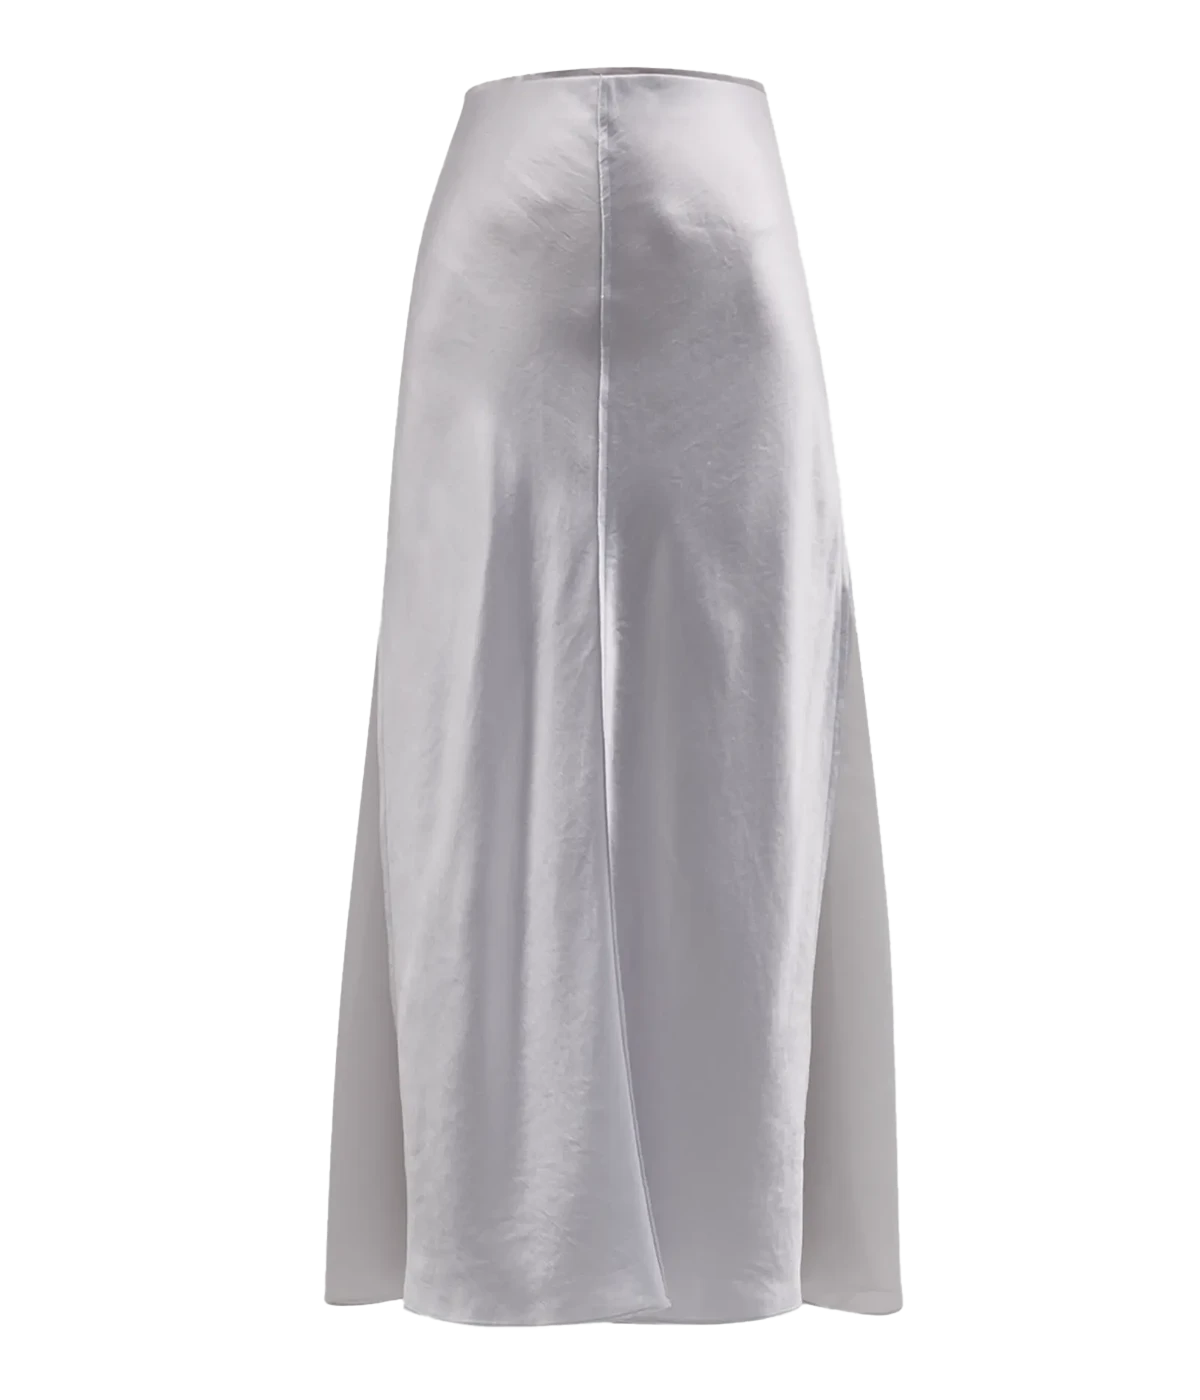 A midi length slip skirt in a silver satin fabric. Sits on the waist with a center front seam. Sheer chiffon panels for added movement. Wear all year, perfect for work and parties.